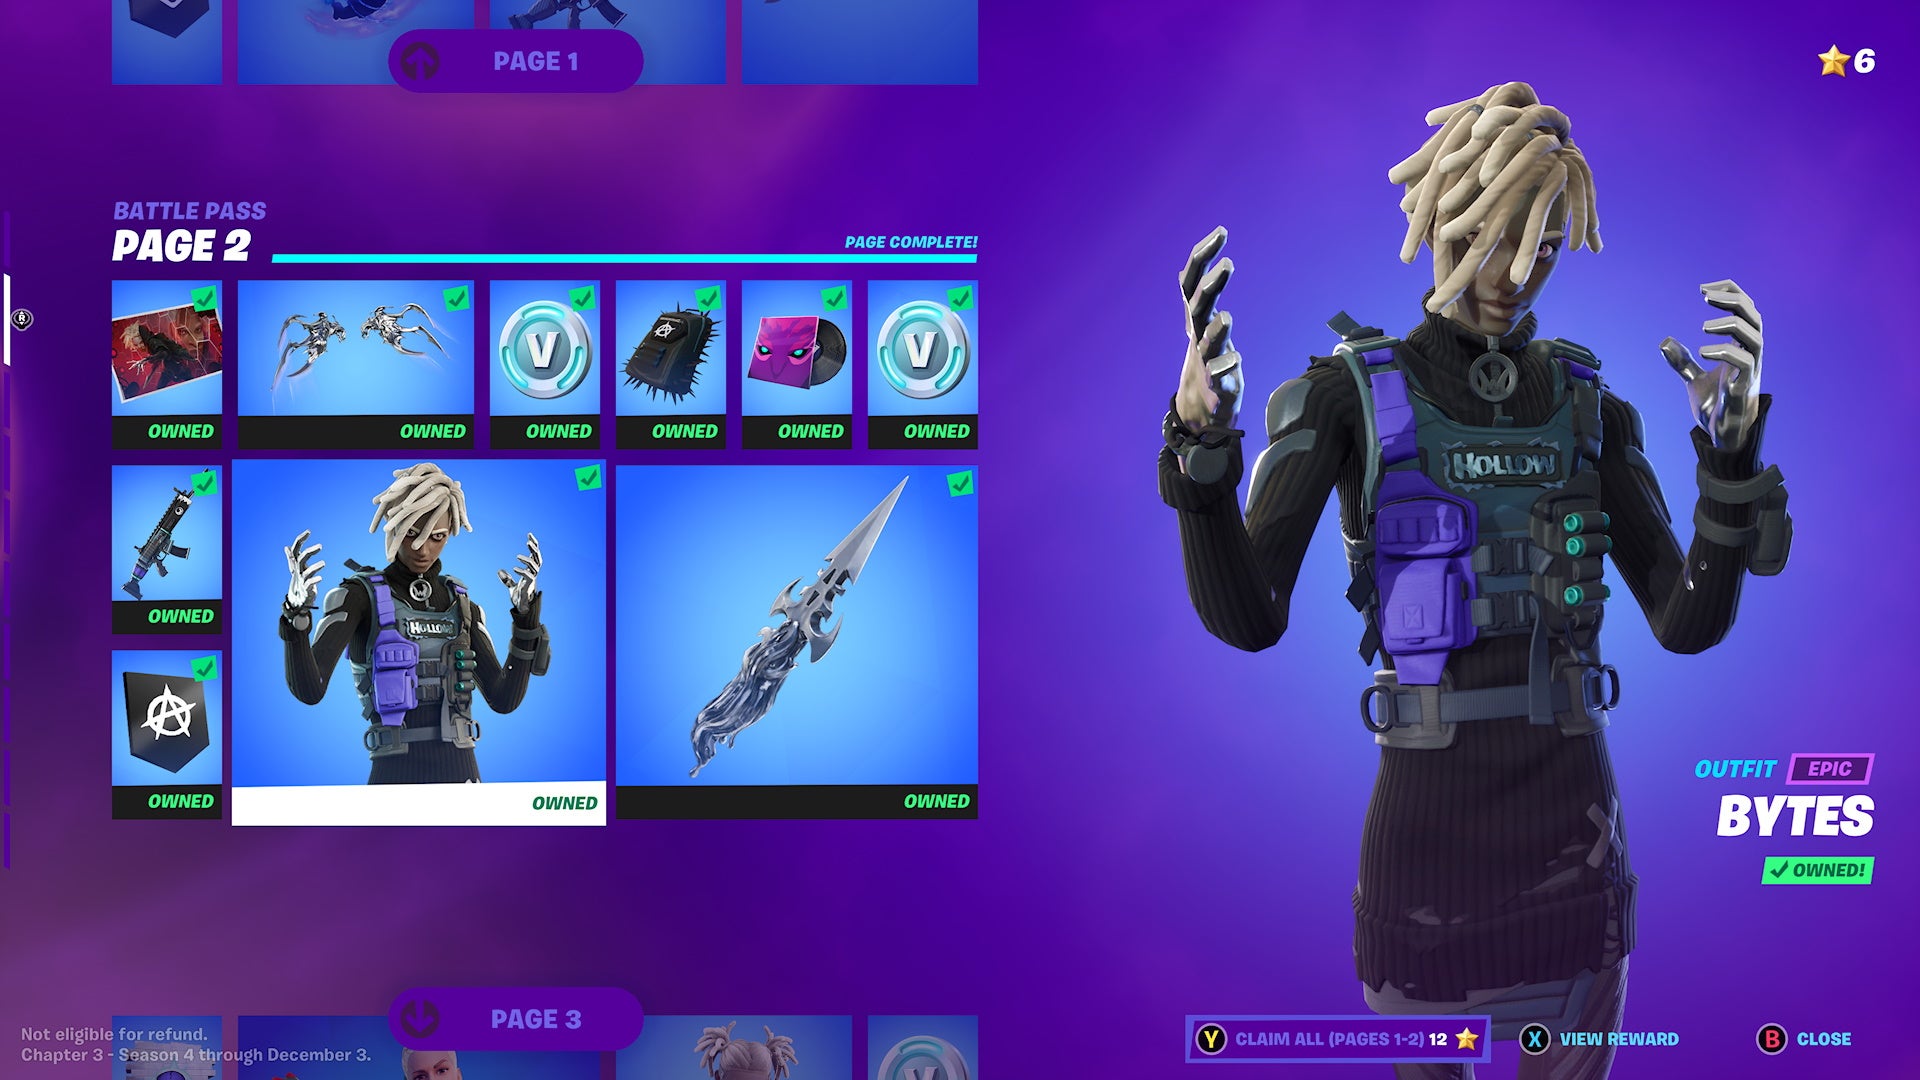 How to unlock the Bytes outfit in Fortnite 1